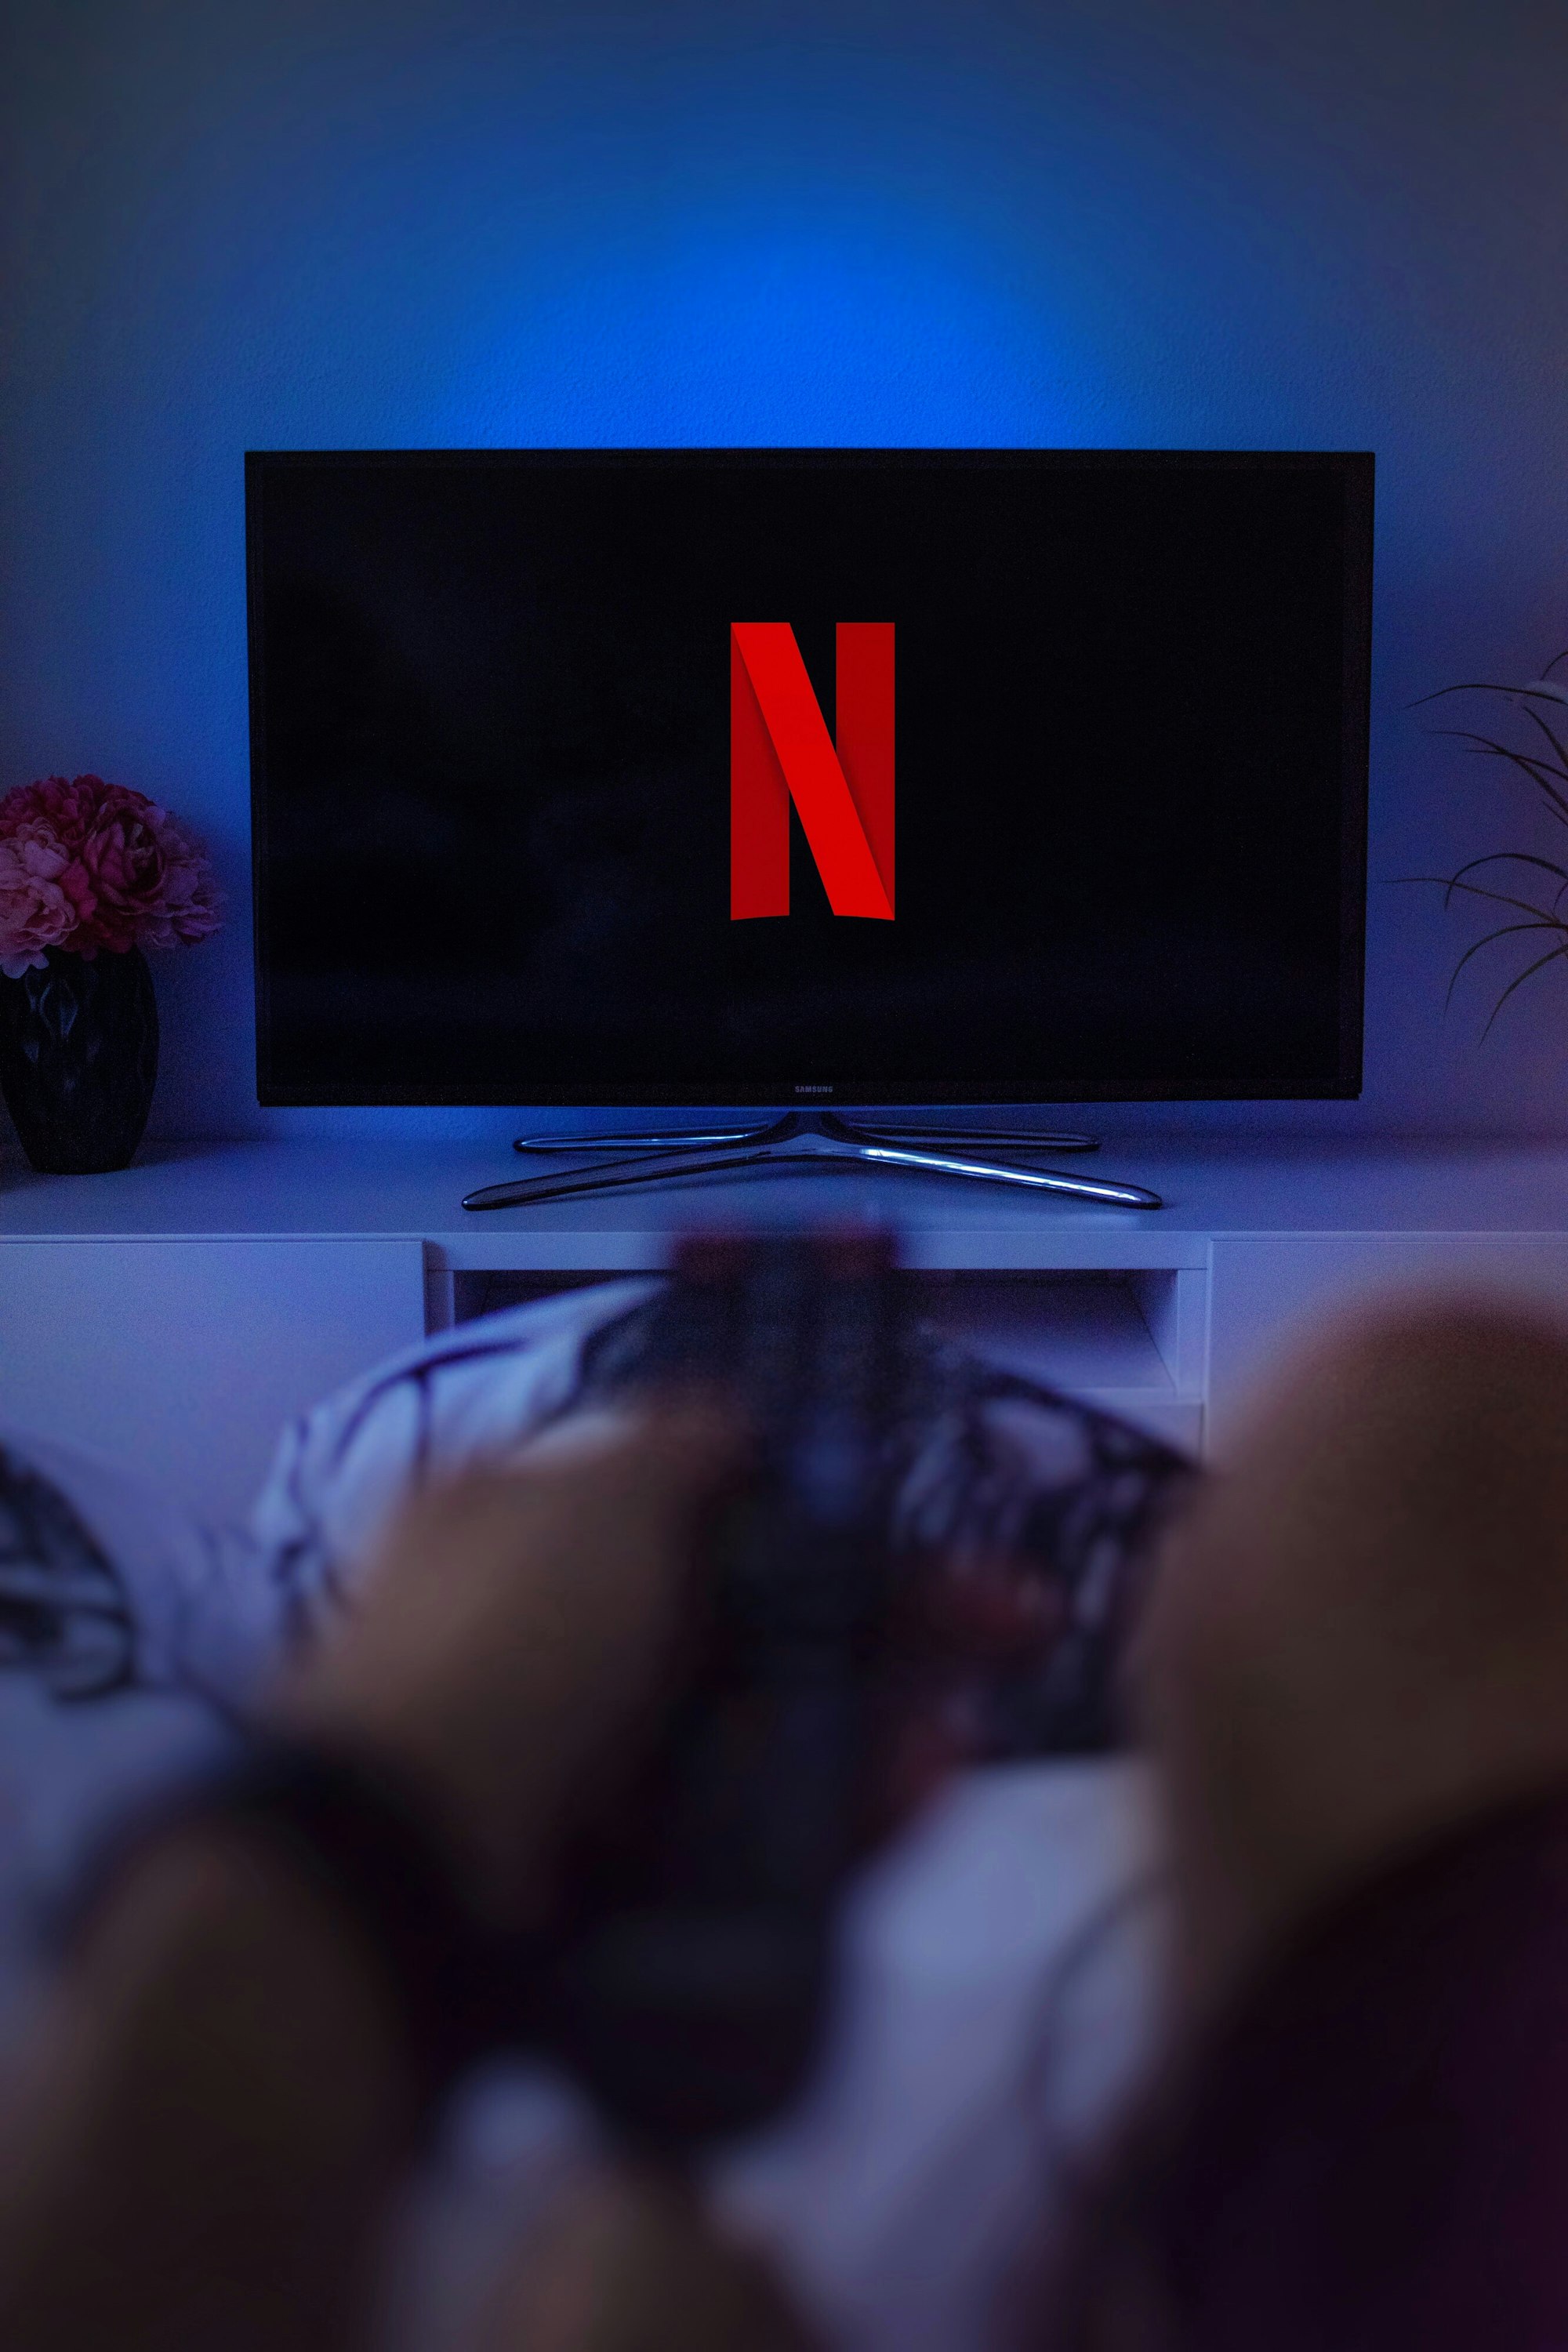 Watching Netflix from bed